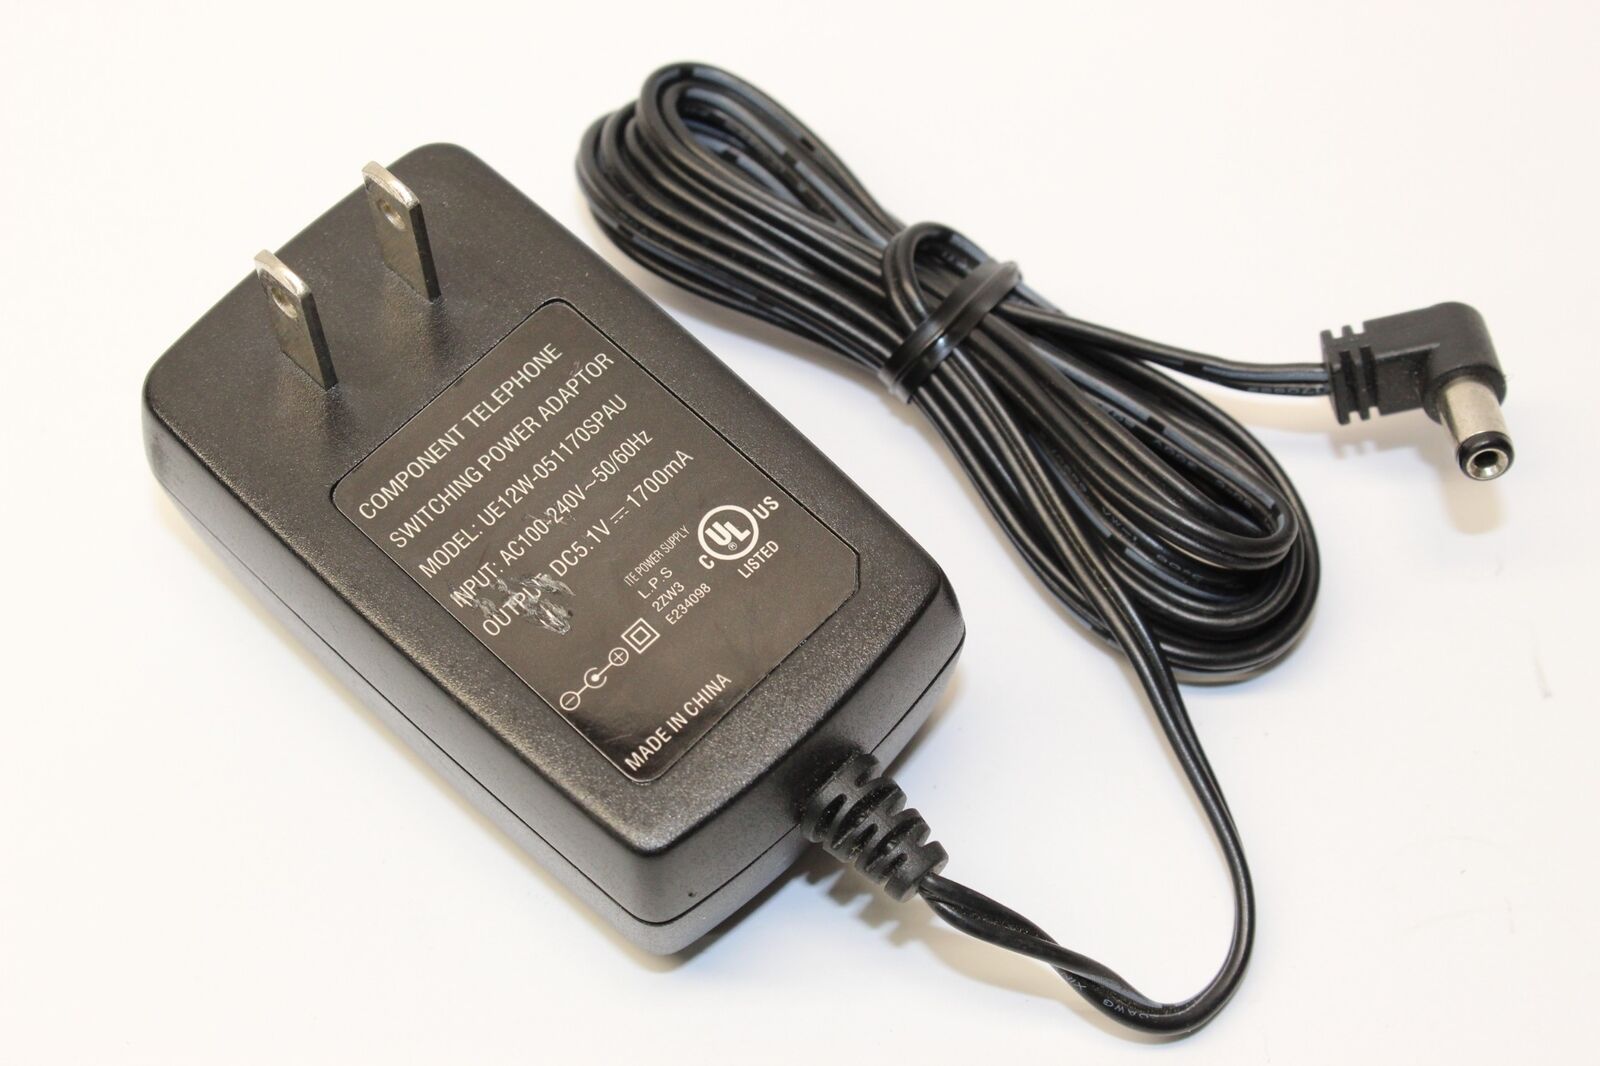 Component Telephone Switching Power AC Adapter UE12W-051170SPAU 5.1V DC 1700mA Brand: Generic Type: Adapter MPN: Do